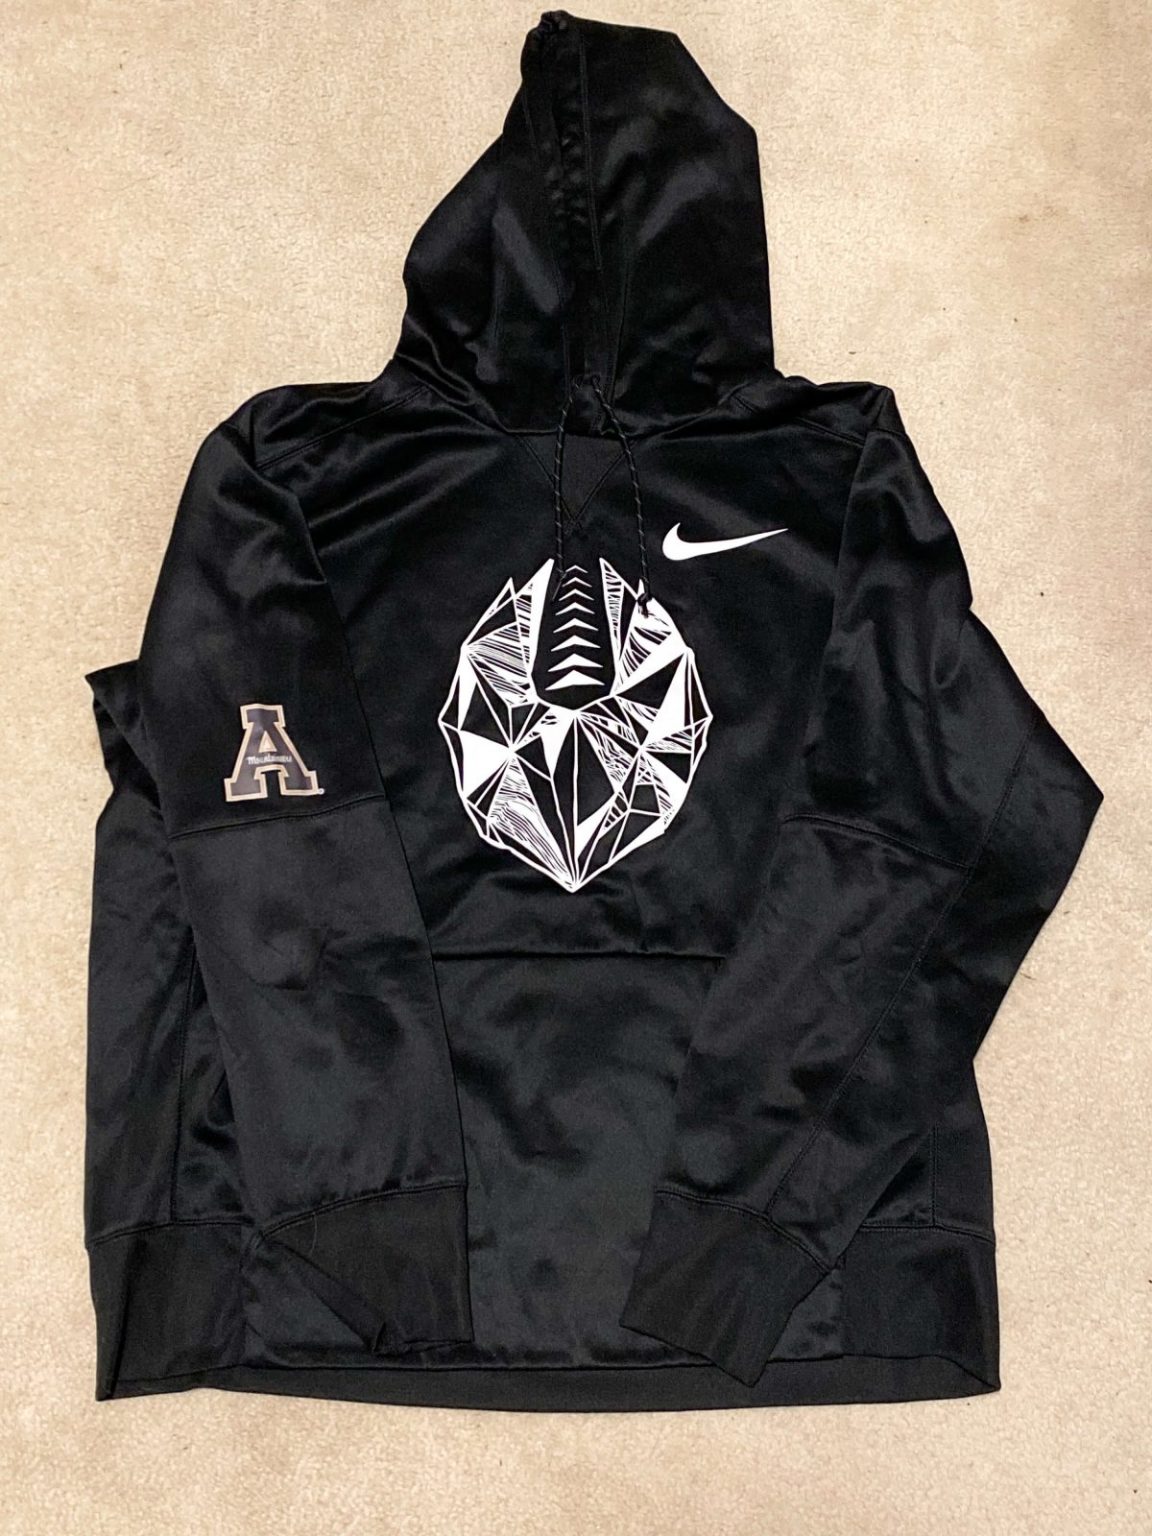 App State New Orleans Bowl Nike Dri-Fit Hoodie : NARP Clothing